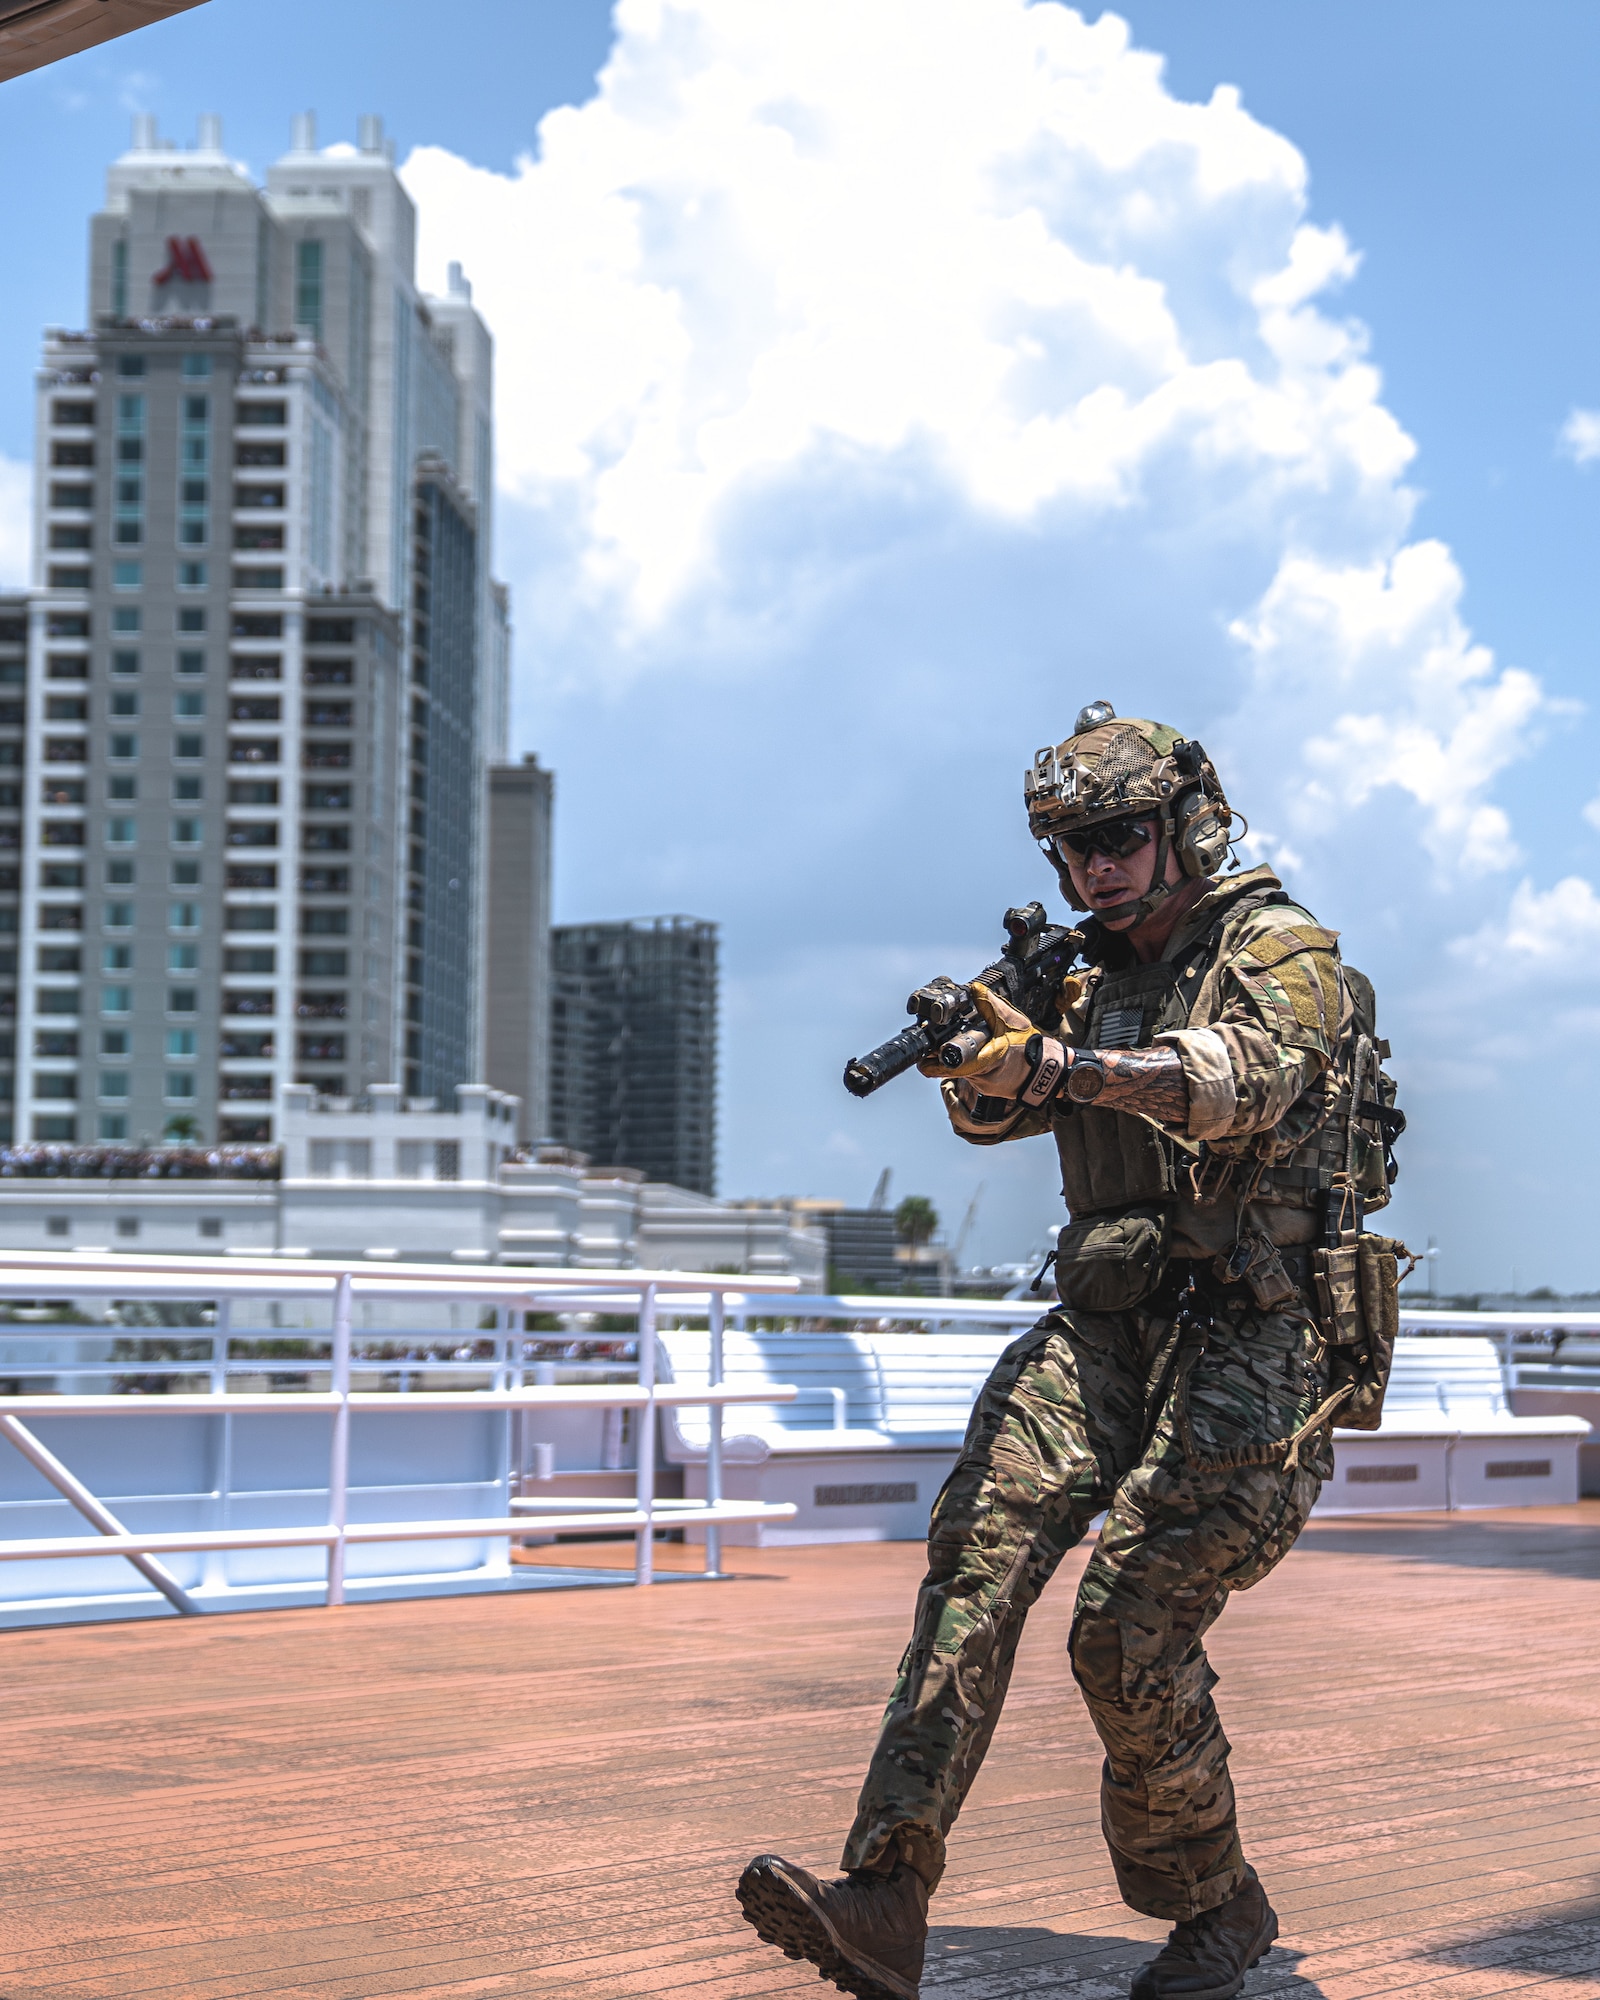 A member assigned to U.S. Special Operations Command searches a boat during a Special Operations Forces (SOF) demonstration in Downtown Tampa, Florida, May 18, 2022.